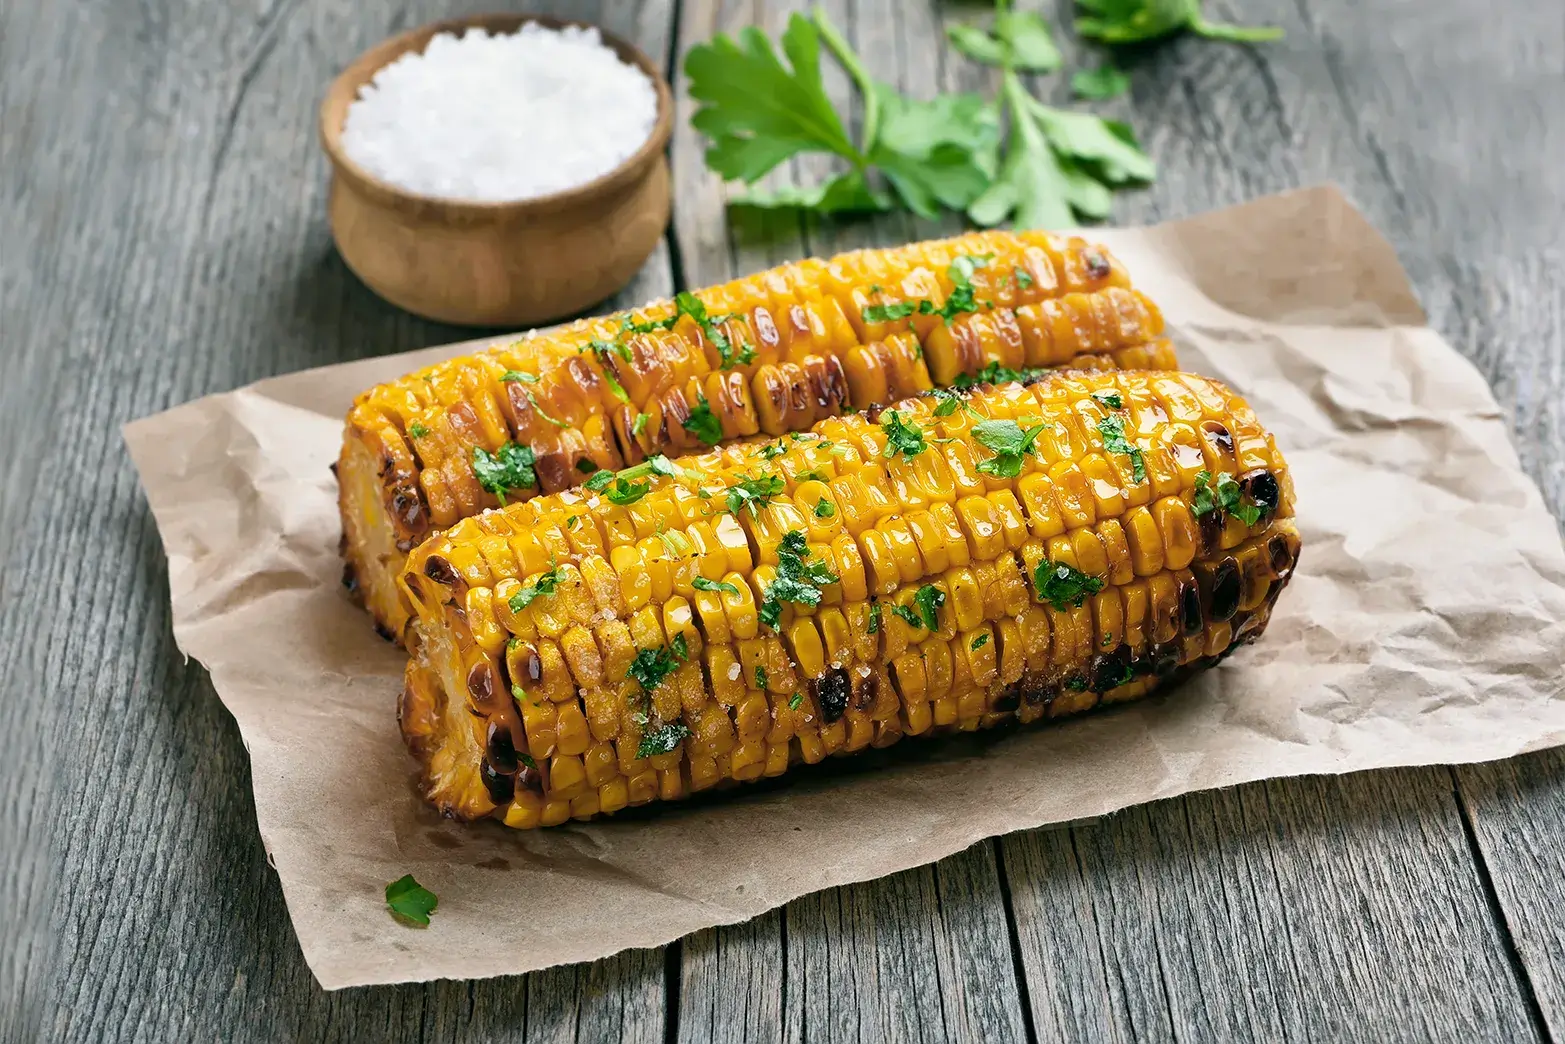 seasoned and grilled corn on the cob